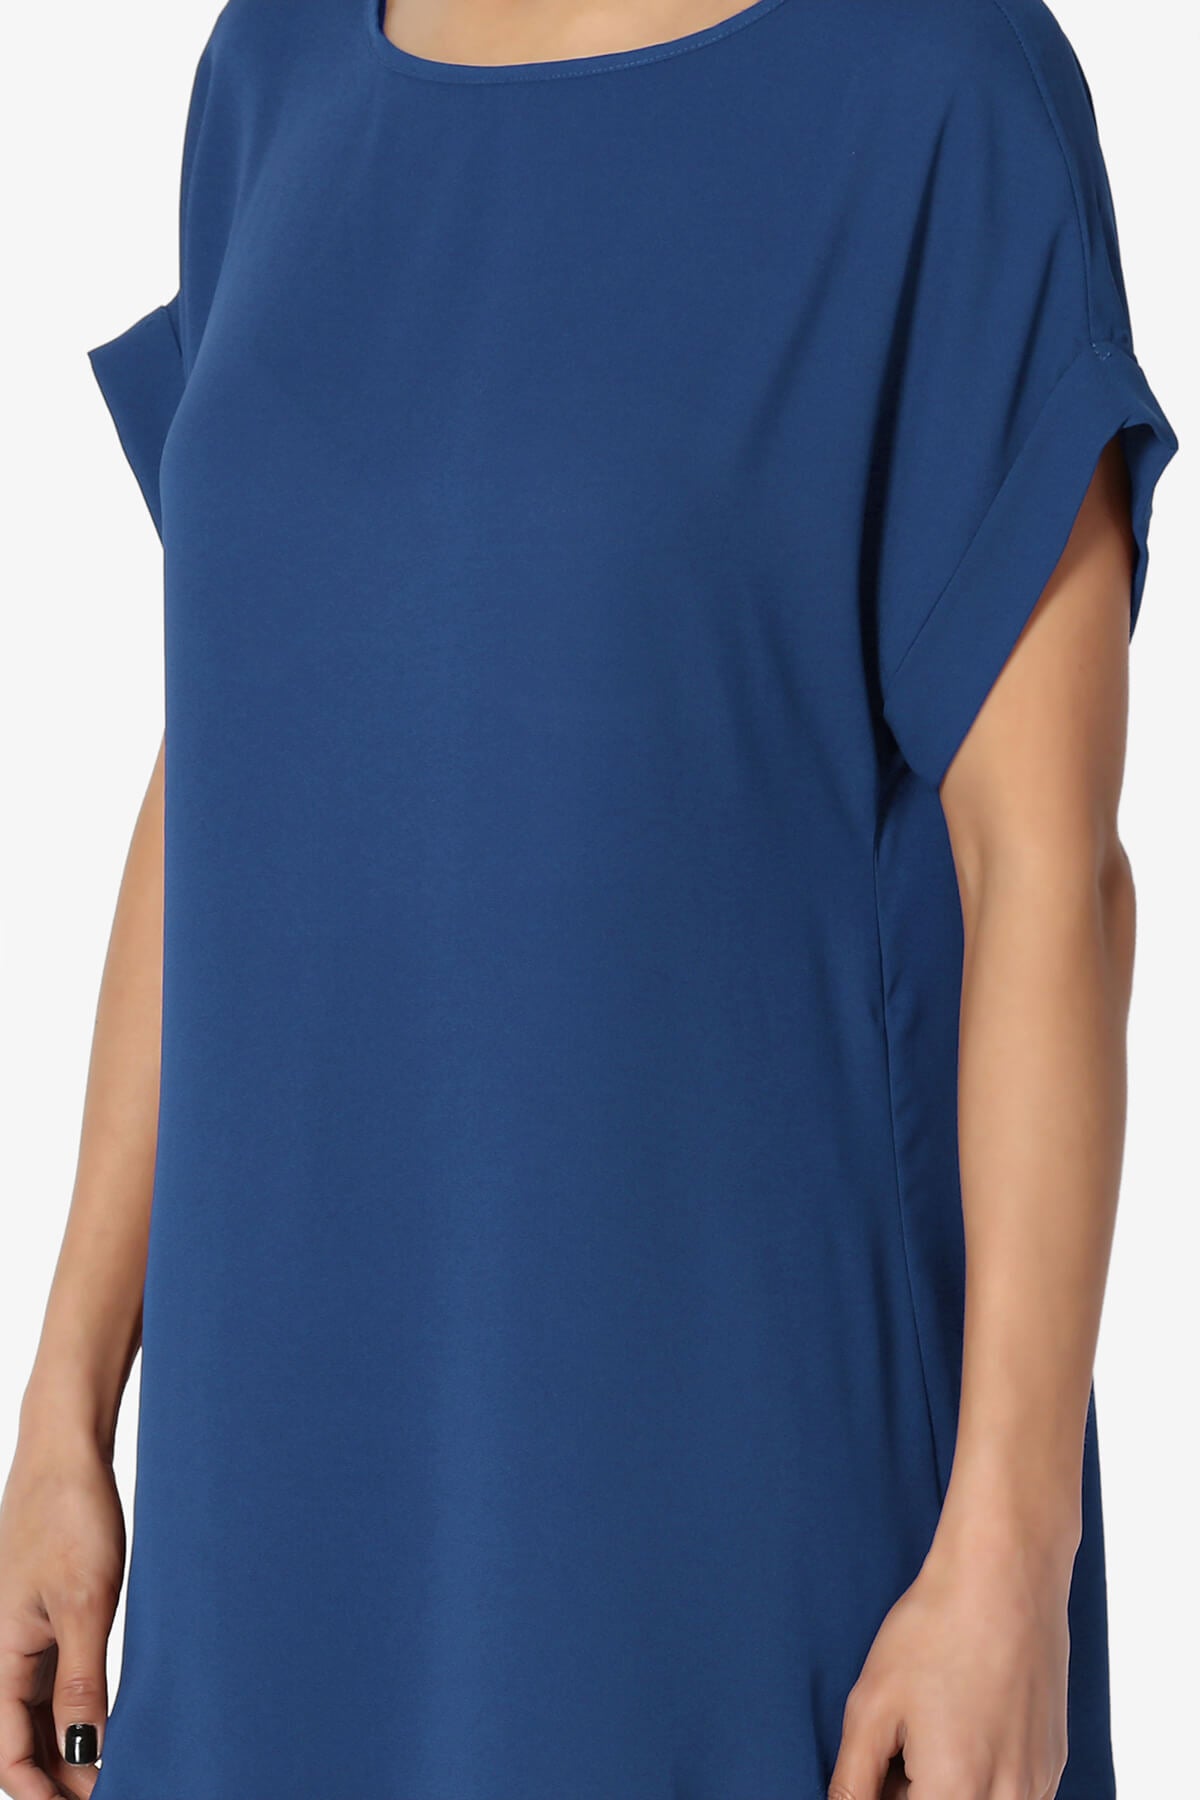 Load image into Gallery viewer, Juliette Boat Neck Chiffon Top MID NAVY_5
